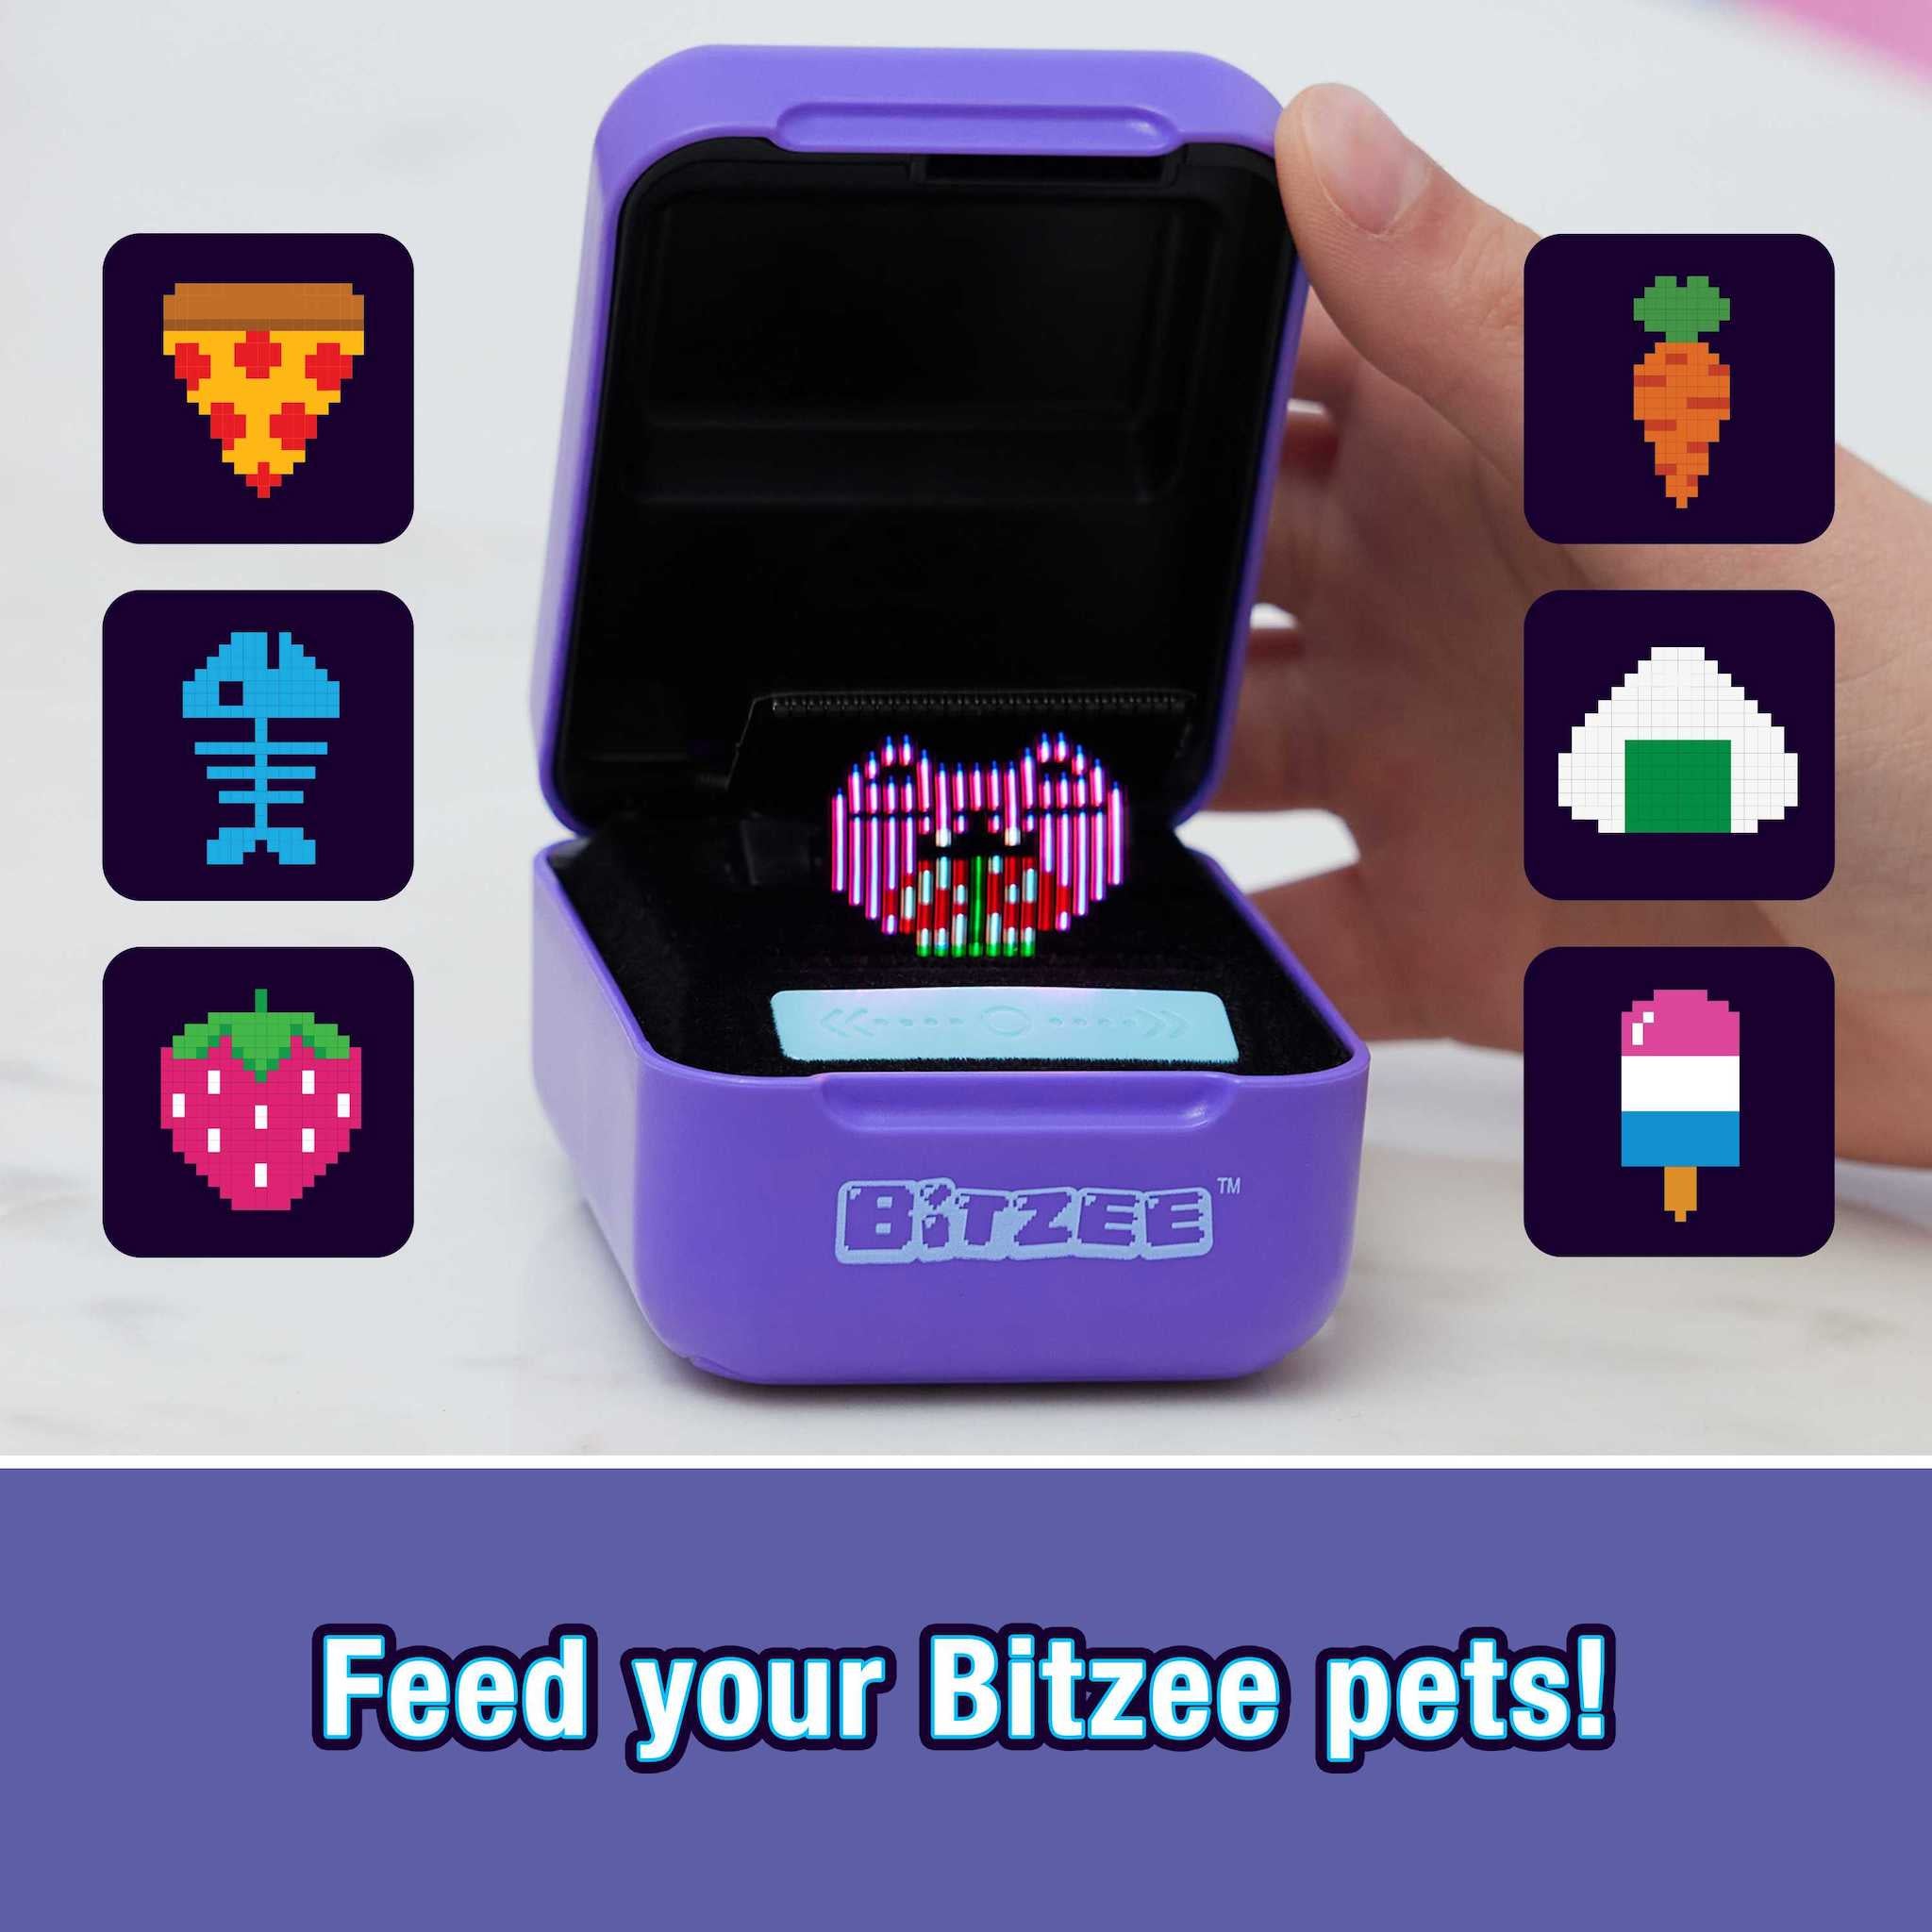 I love my Bitzee pet!! 💜 My favorite thing to relax and have some fun, bitzee